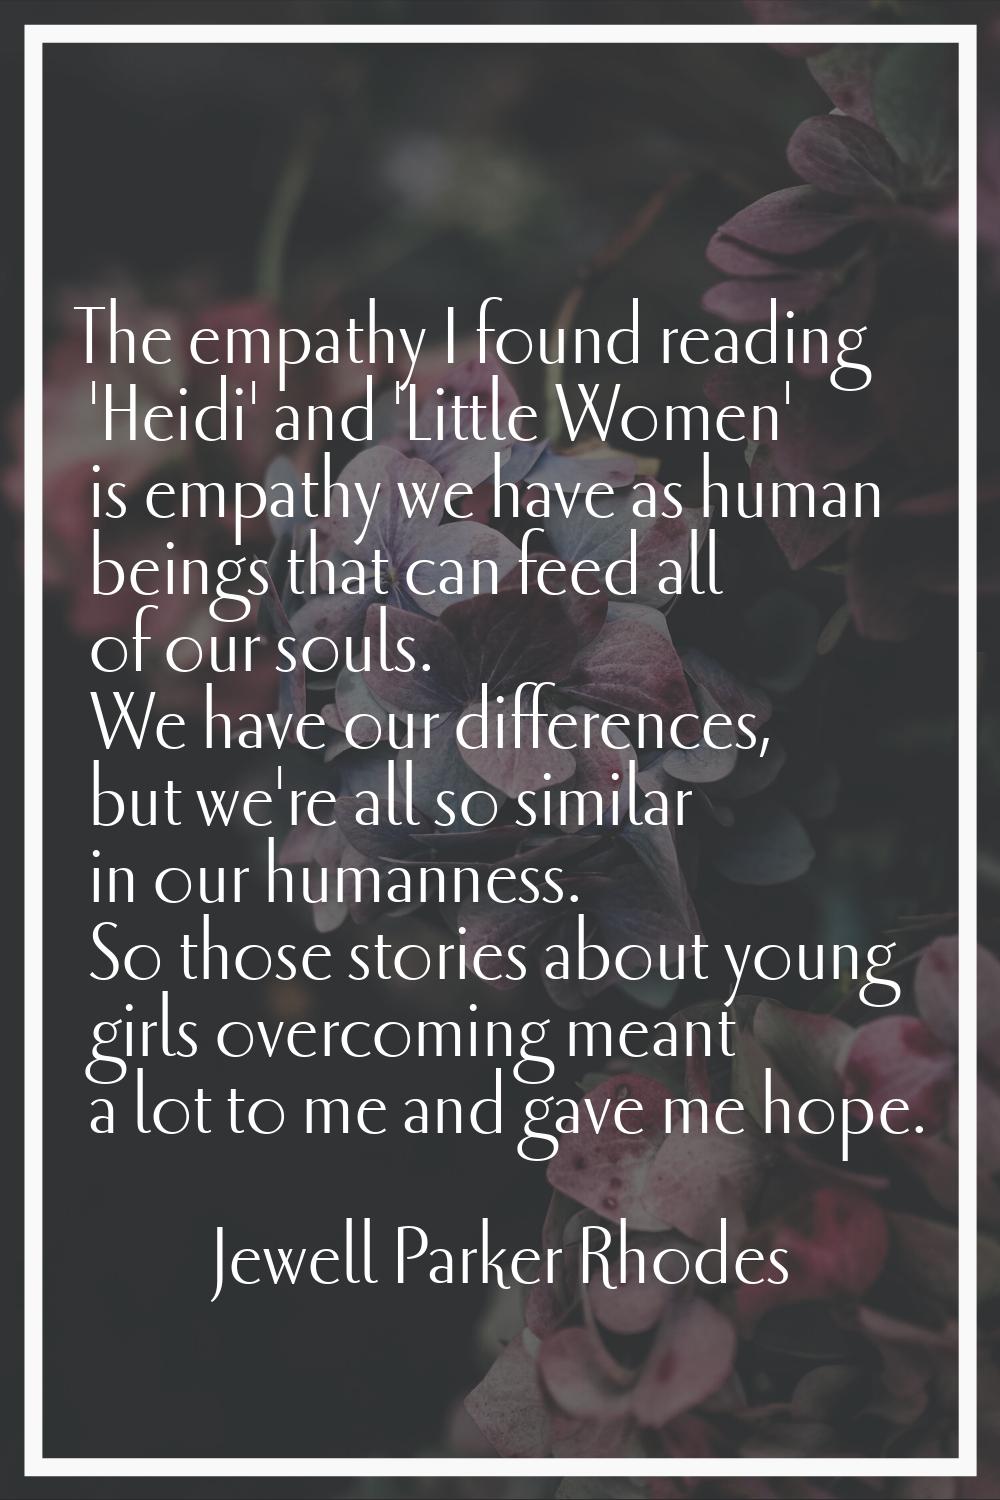 The empathy I found reading 'Heidi' and 'Little Women' is empathy we have as human beings that can 